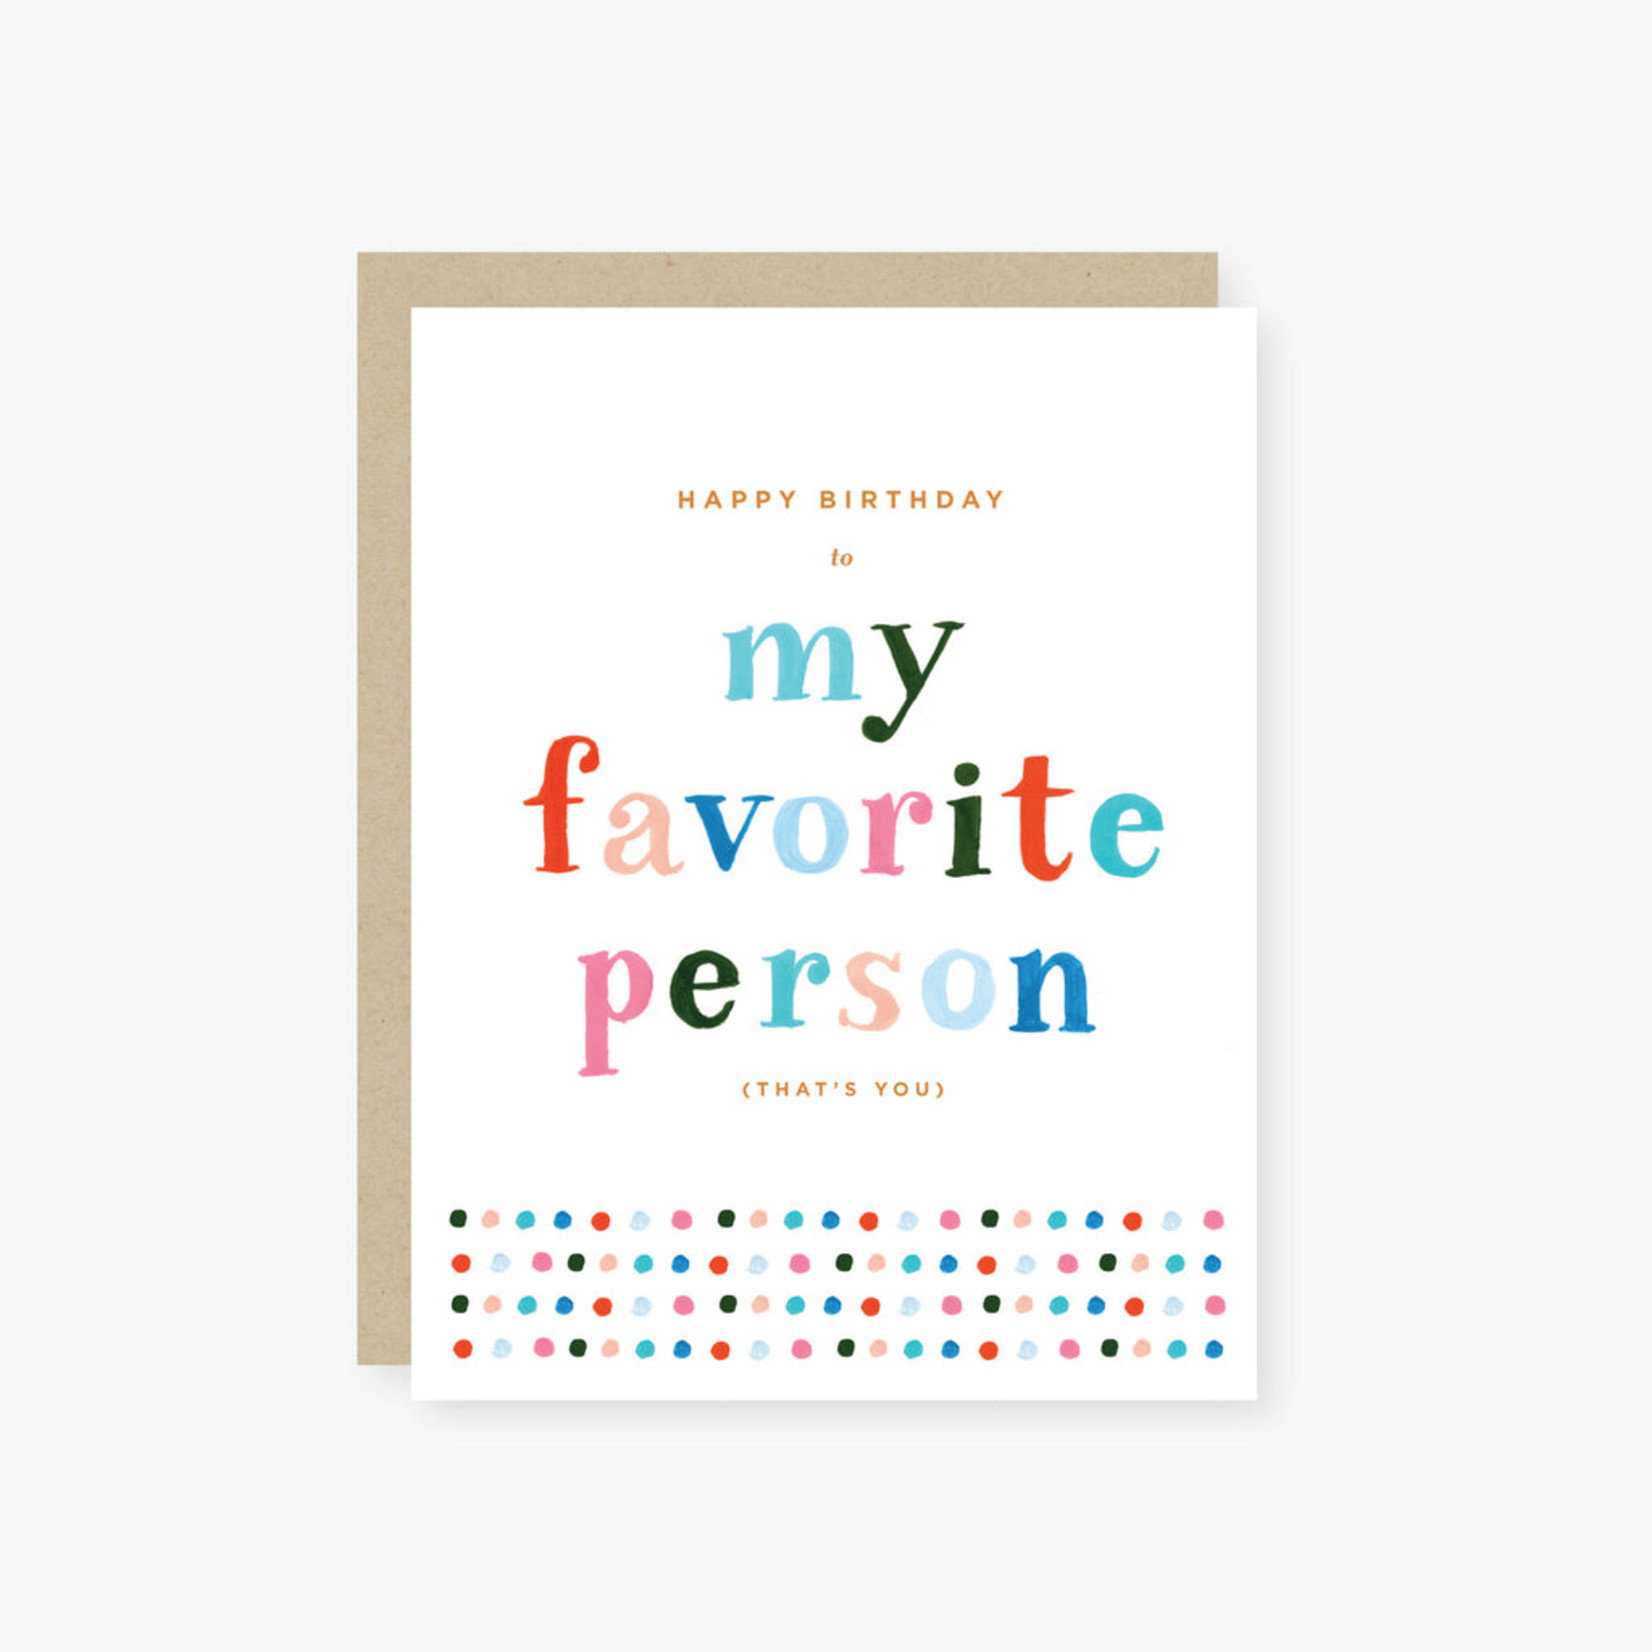 2021 Co 2021 Co - Birthday Card - My Favorite Person